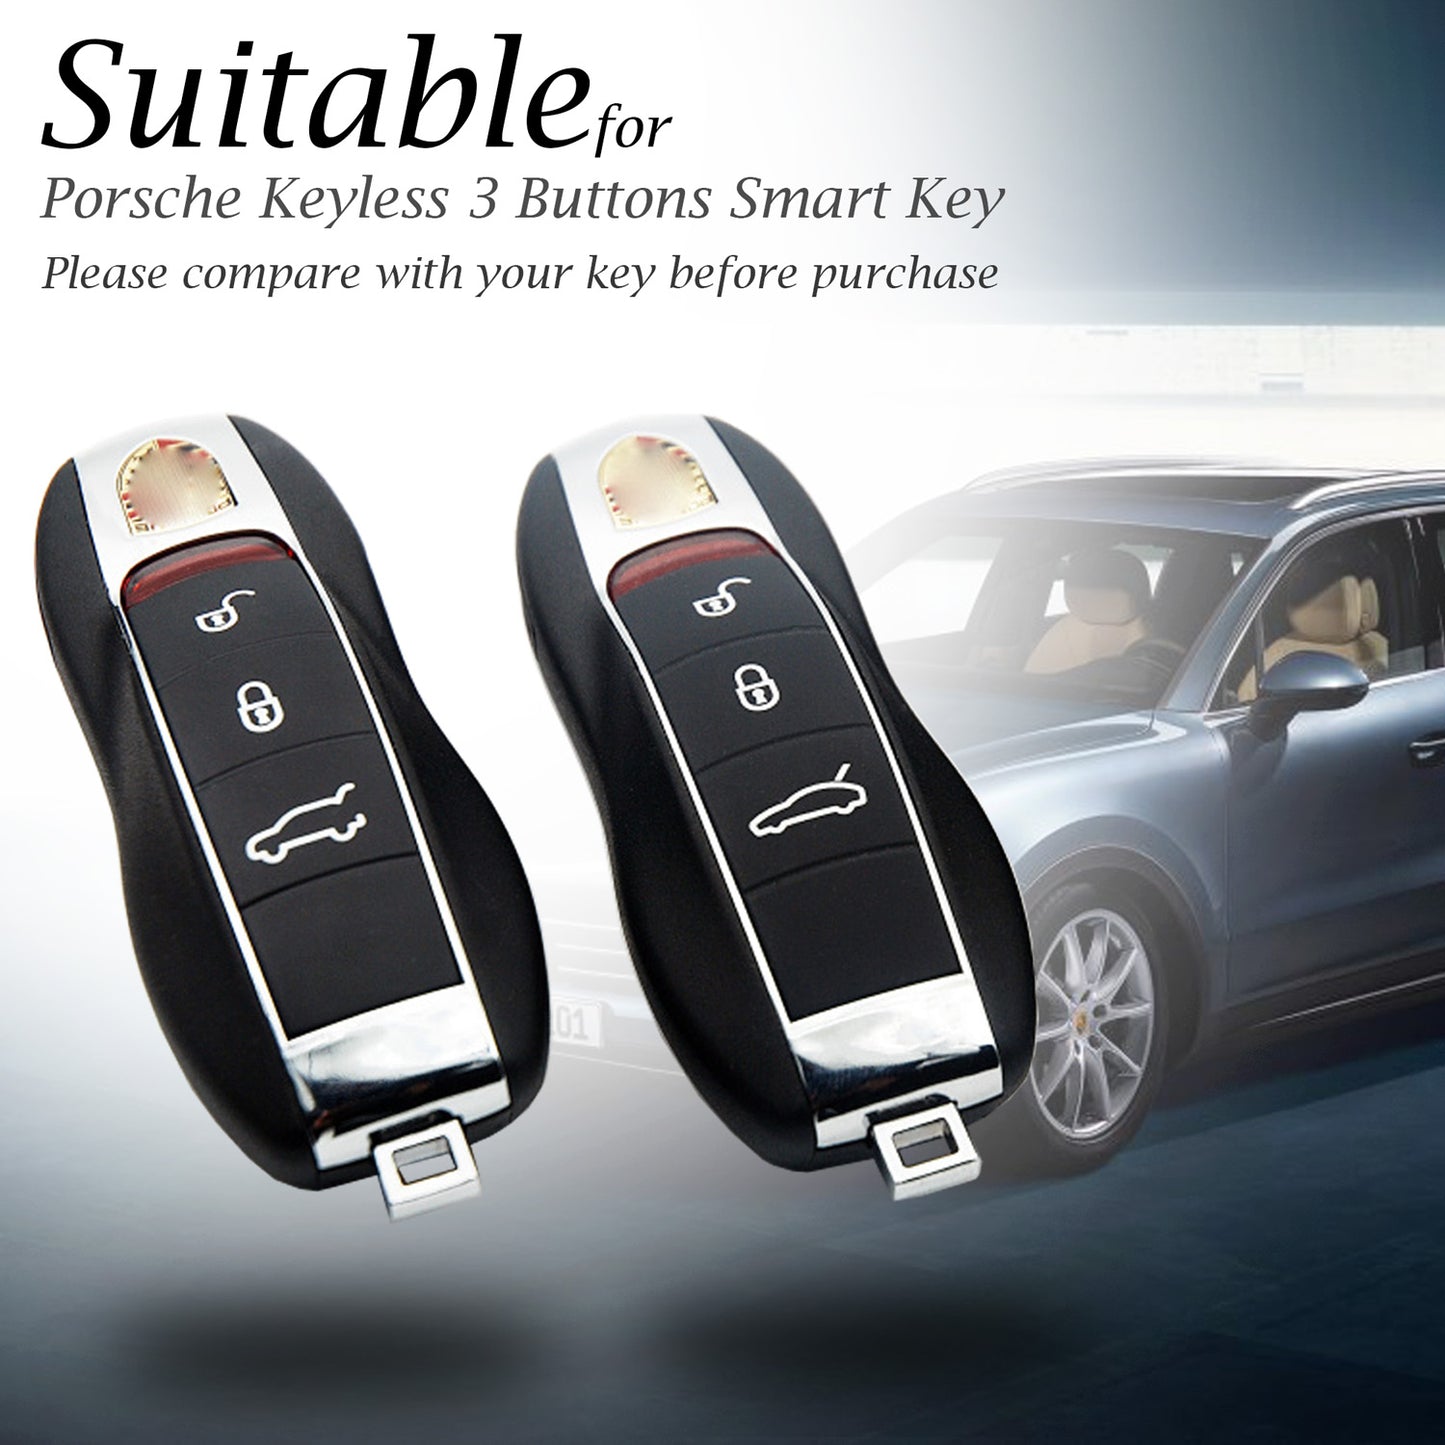 Vitodeco 3-Button Genuine Leather Keyless Entry Remote Control Smart Key Case Cover Compatible for Porsche Panamera, Macan, Cayenne, 911